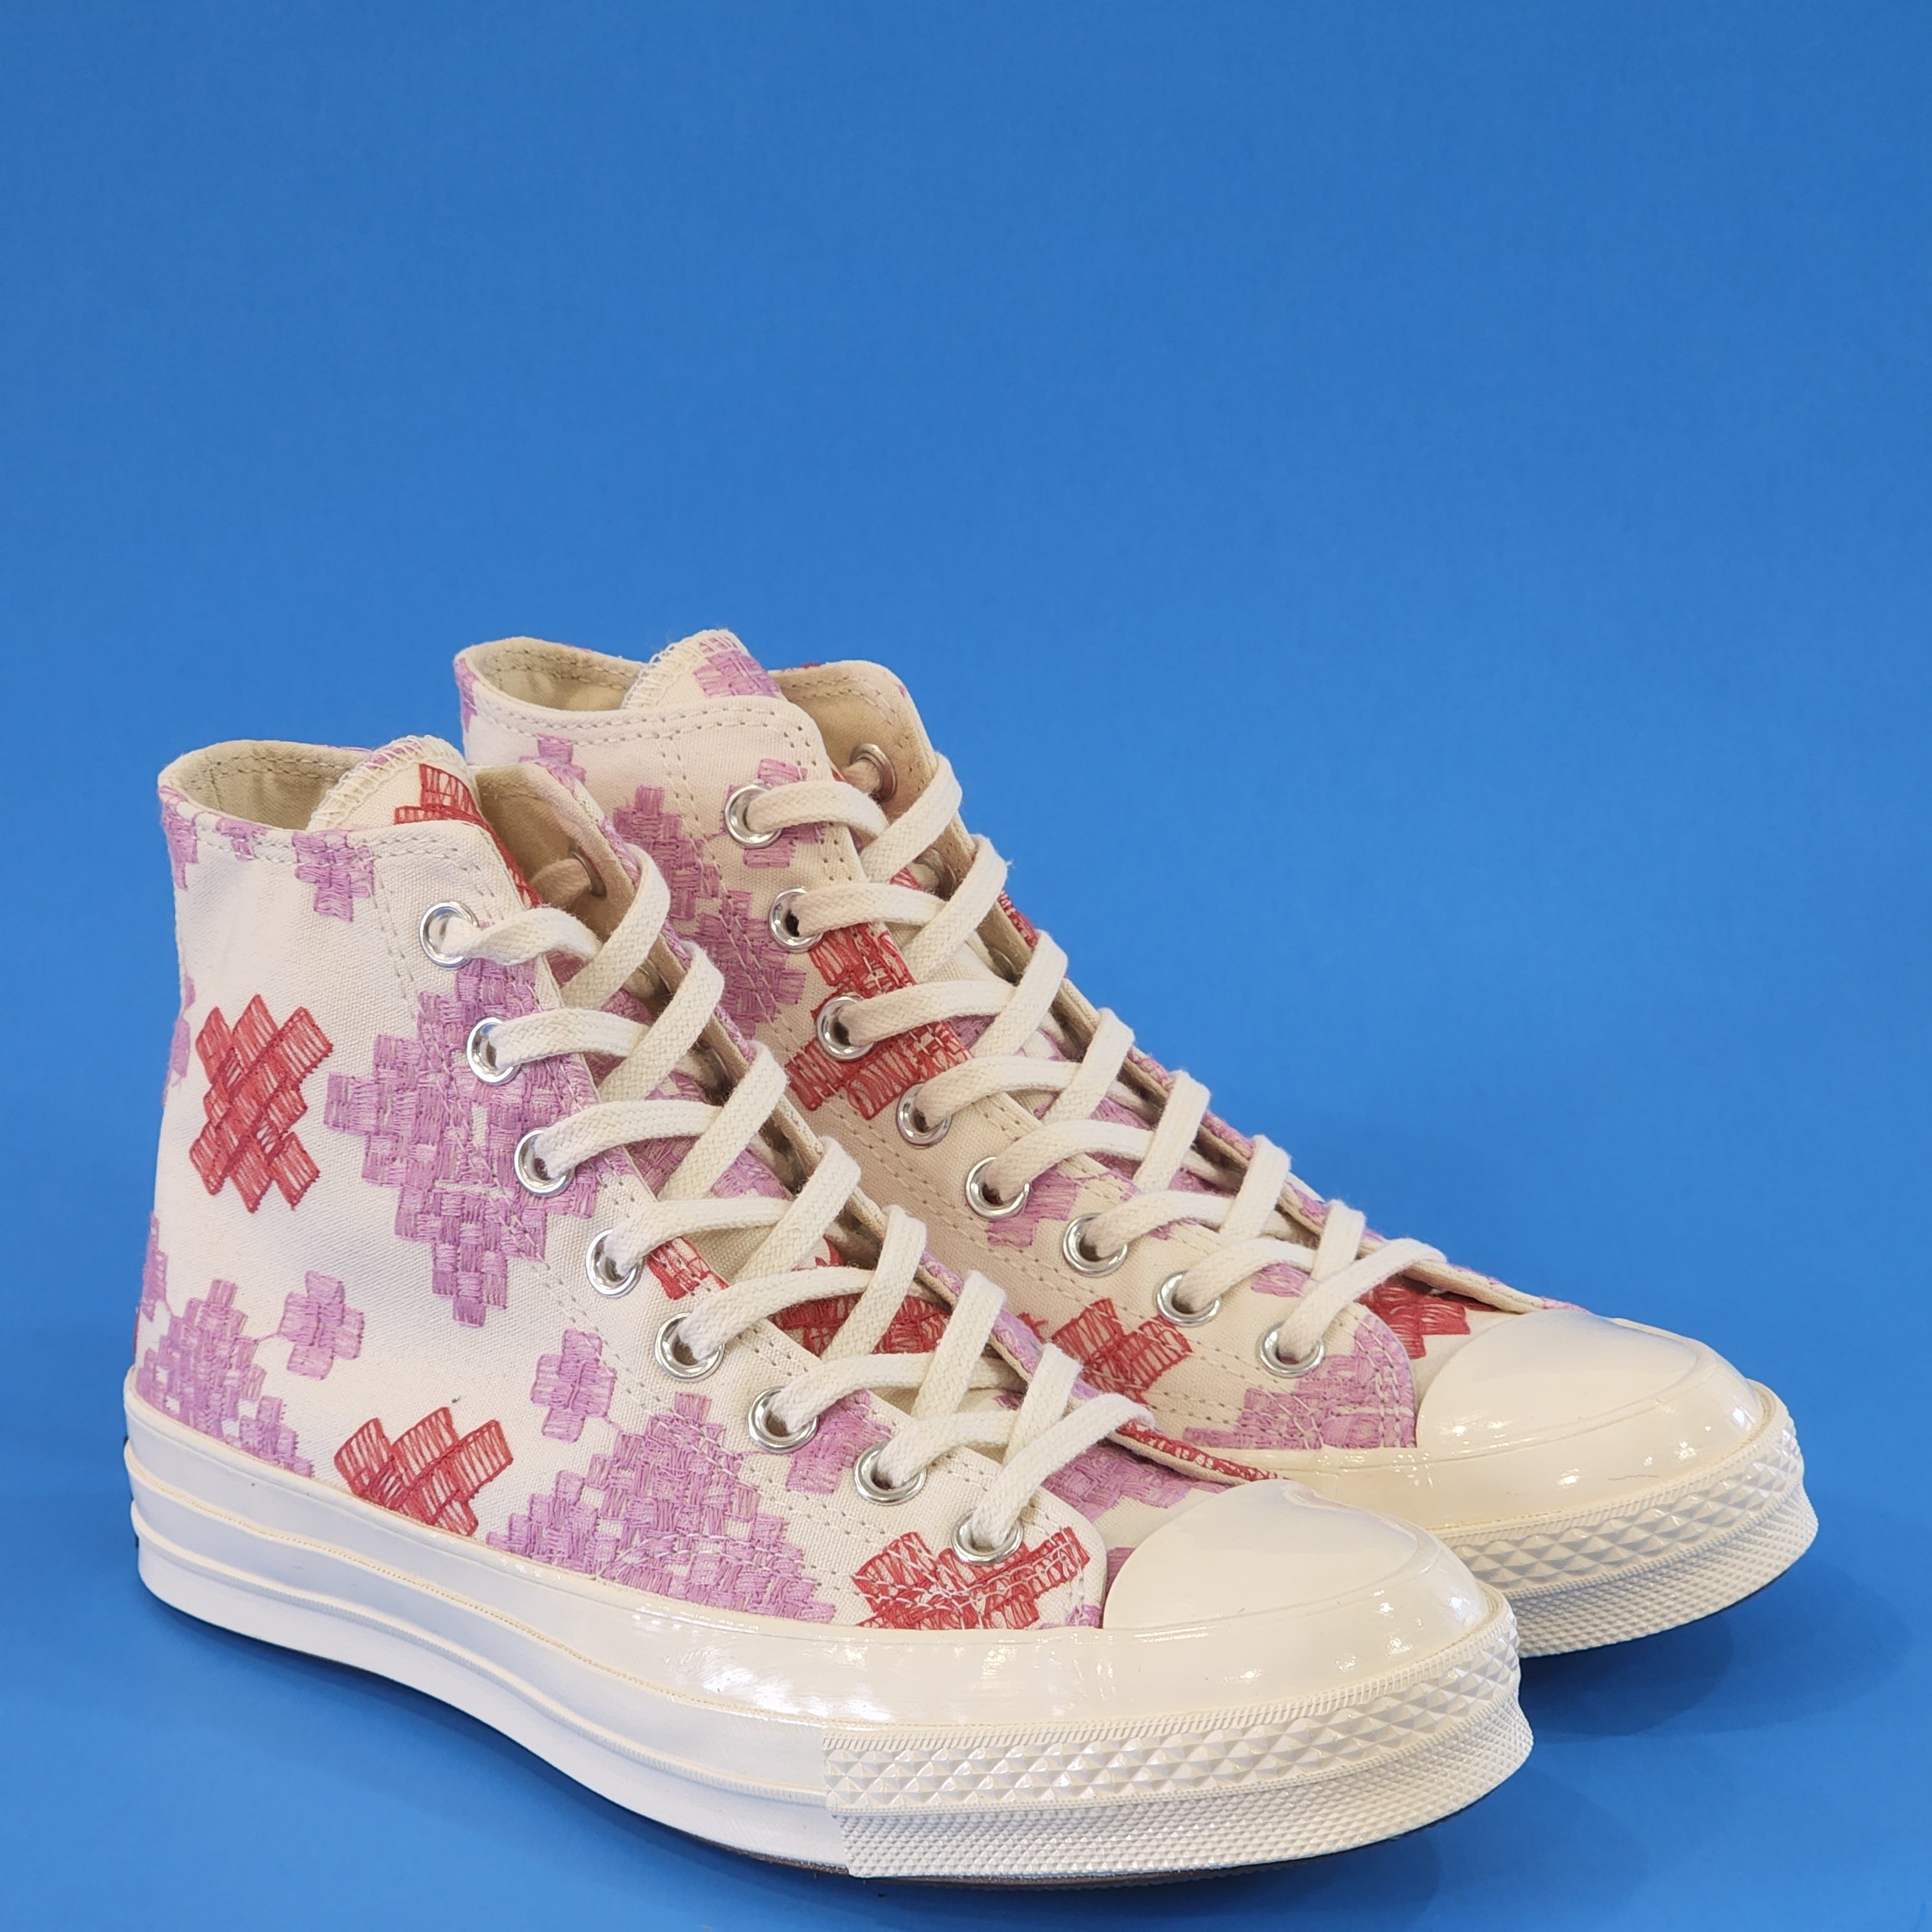 Converse Chuck 70 Hi Bright Embroidery Canvas Women's Sneakers A02183C NWT